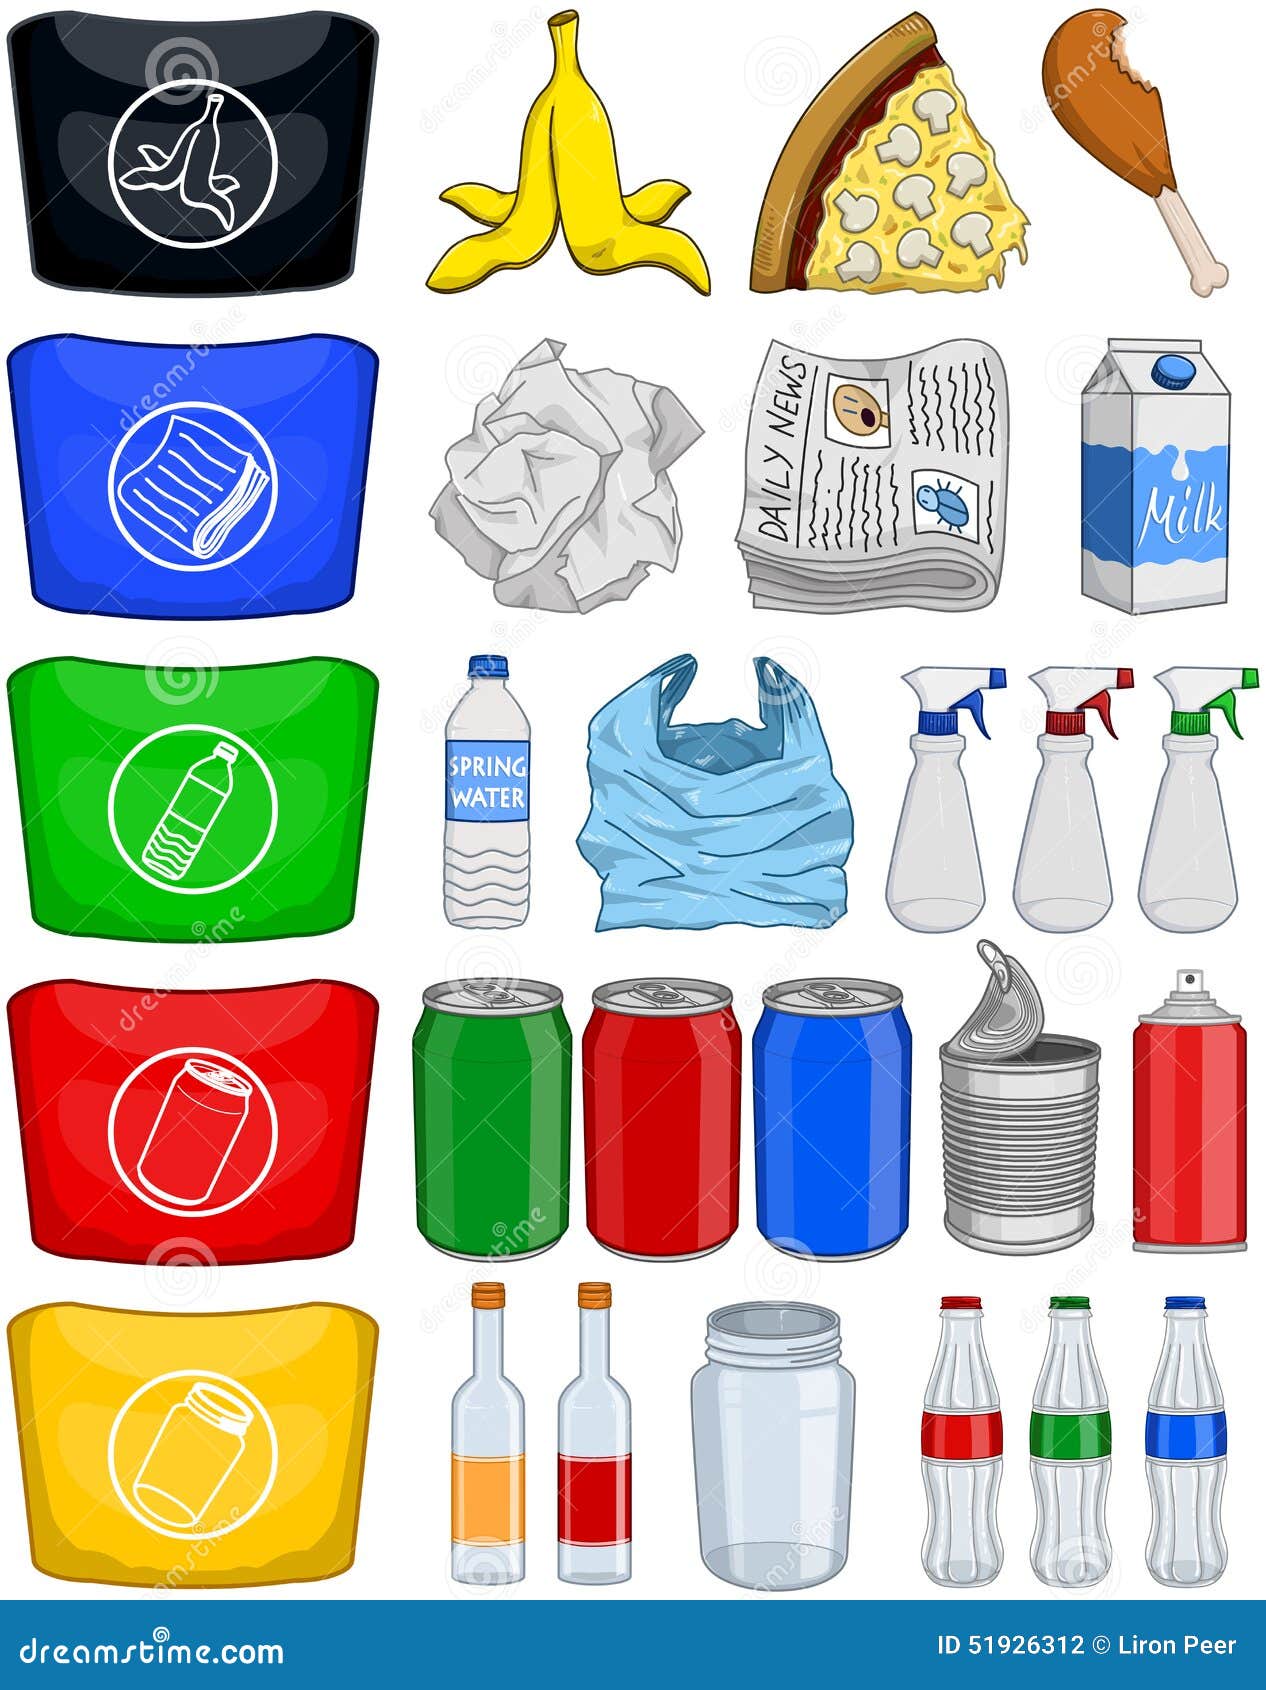 Food Bottles Cans Paper Trash Recycle Pack Stock Vector - Image: 51926312